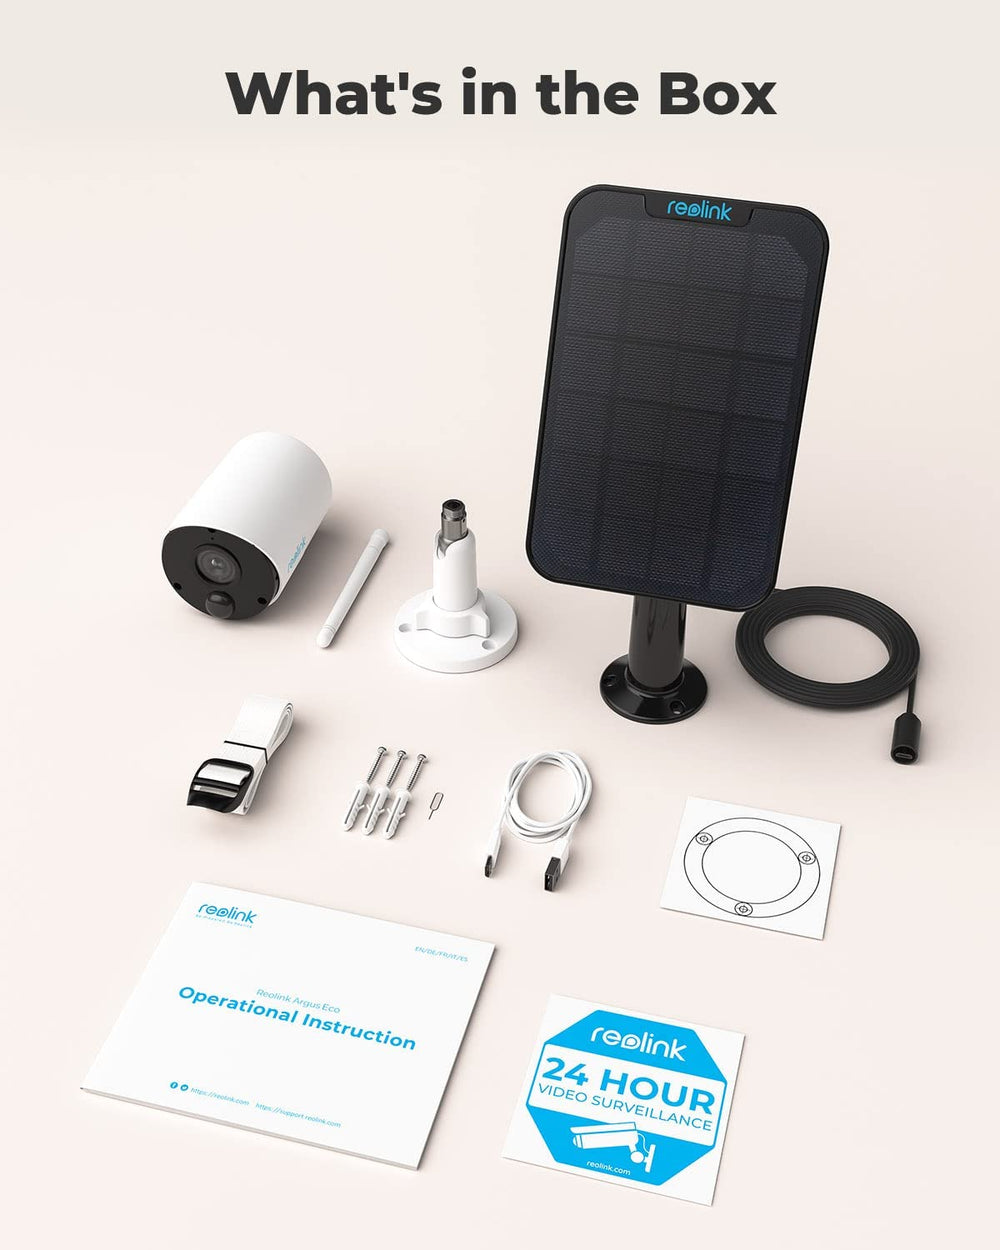 Rechargeable Outdoor Solar Panel / Security CAM Bundle (with Night Vision)